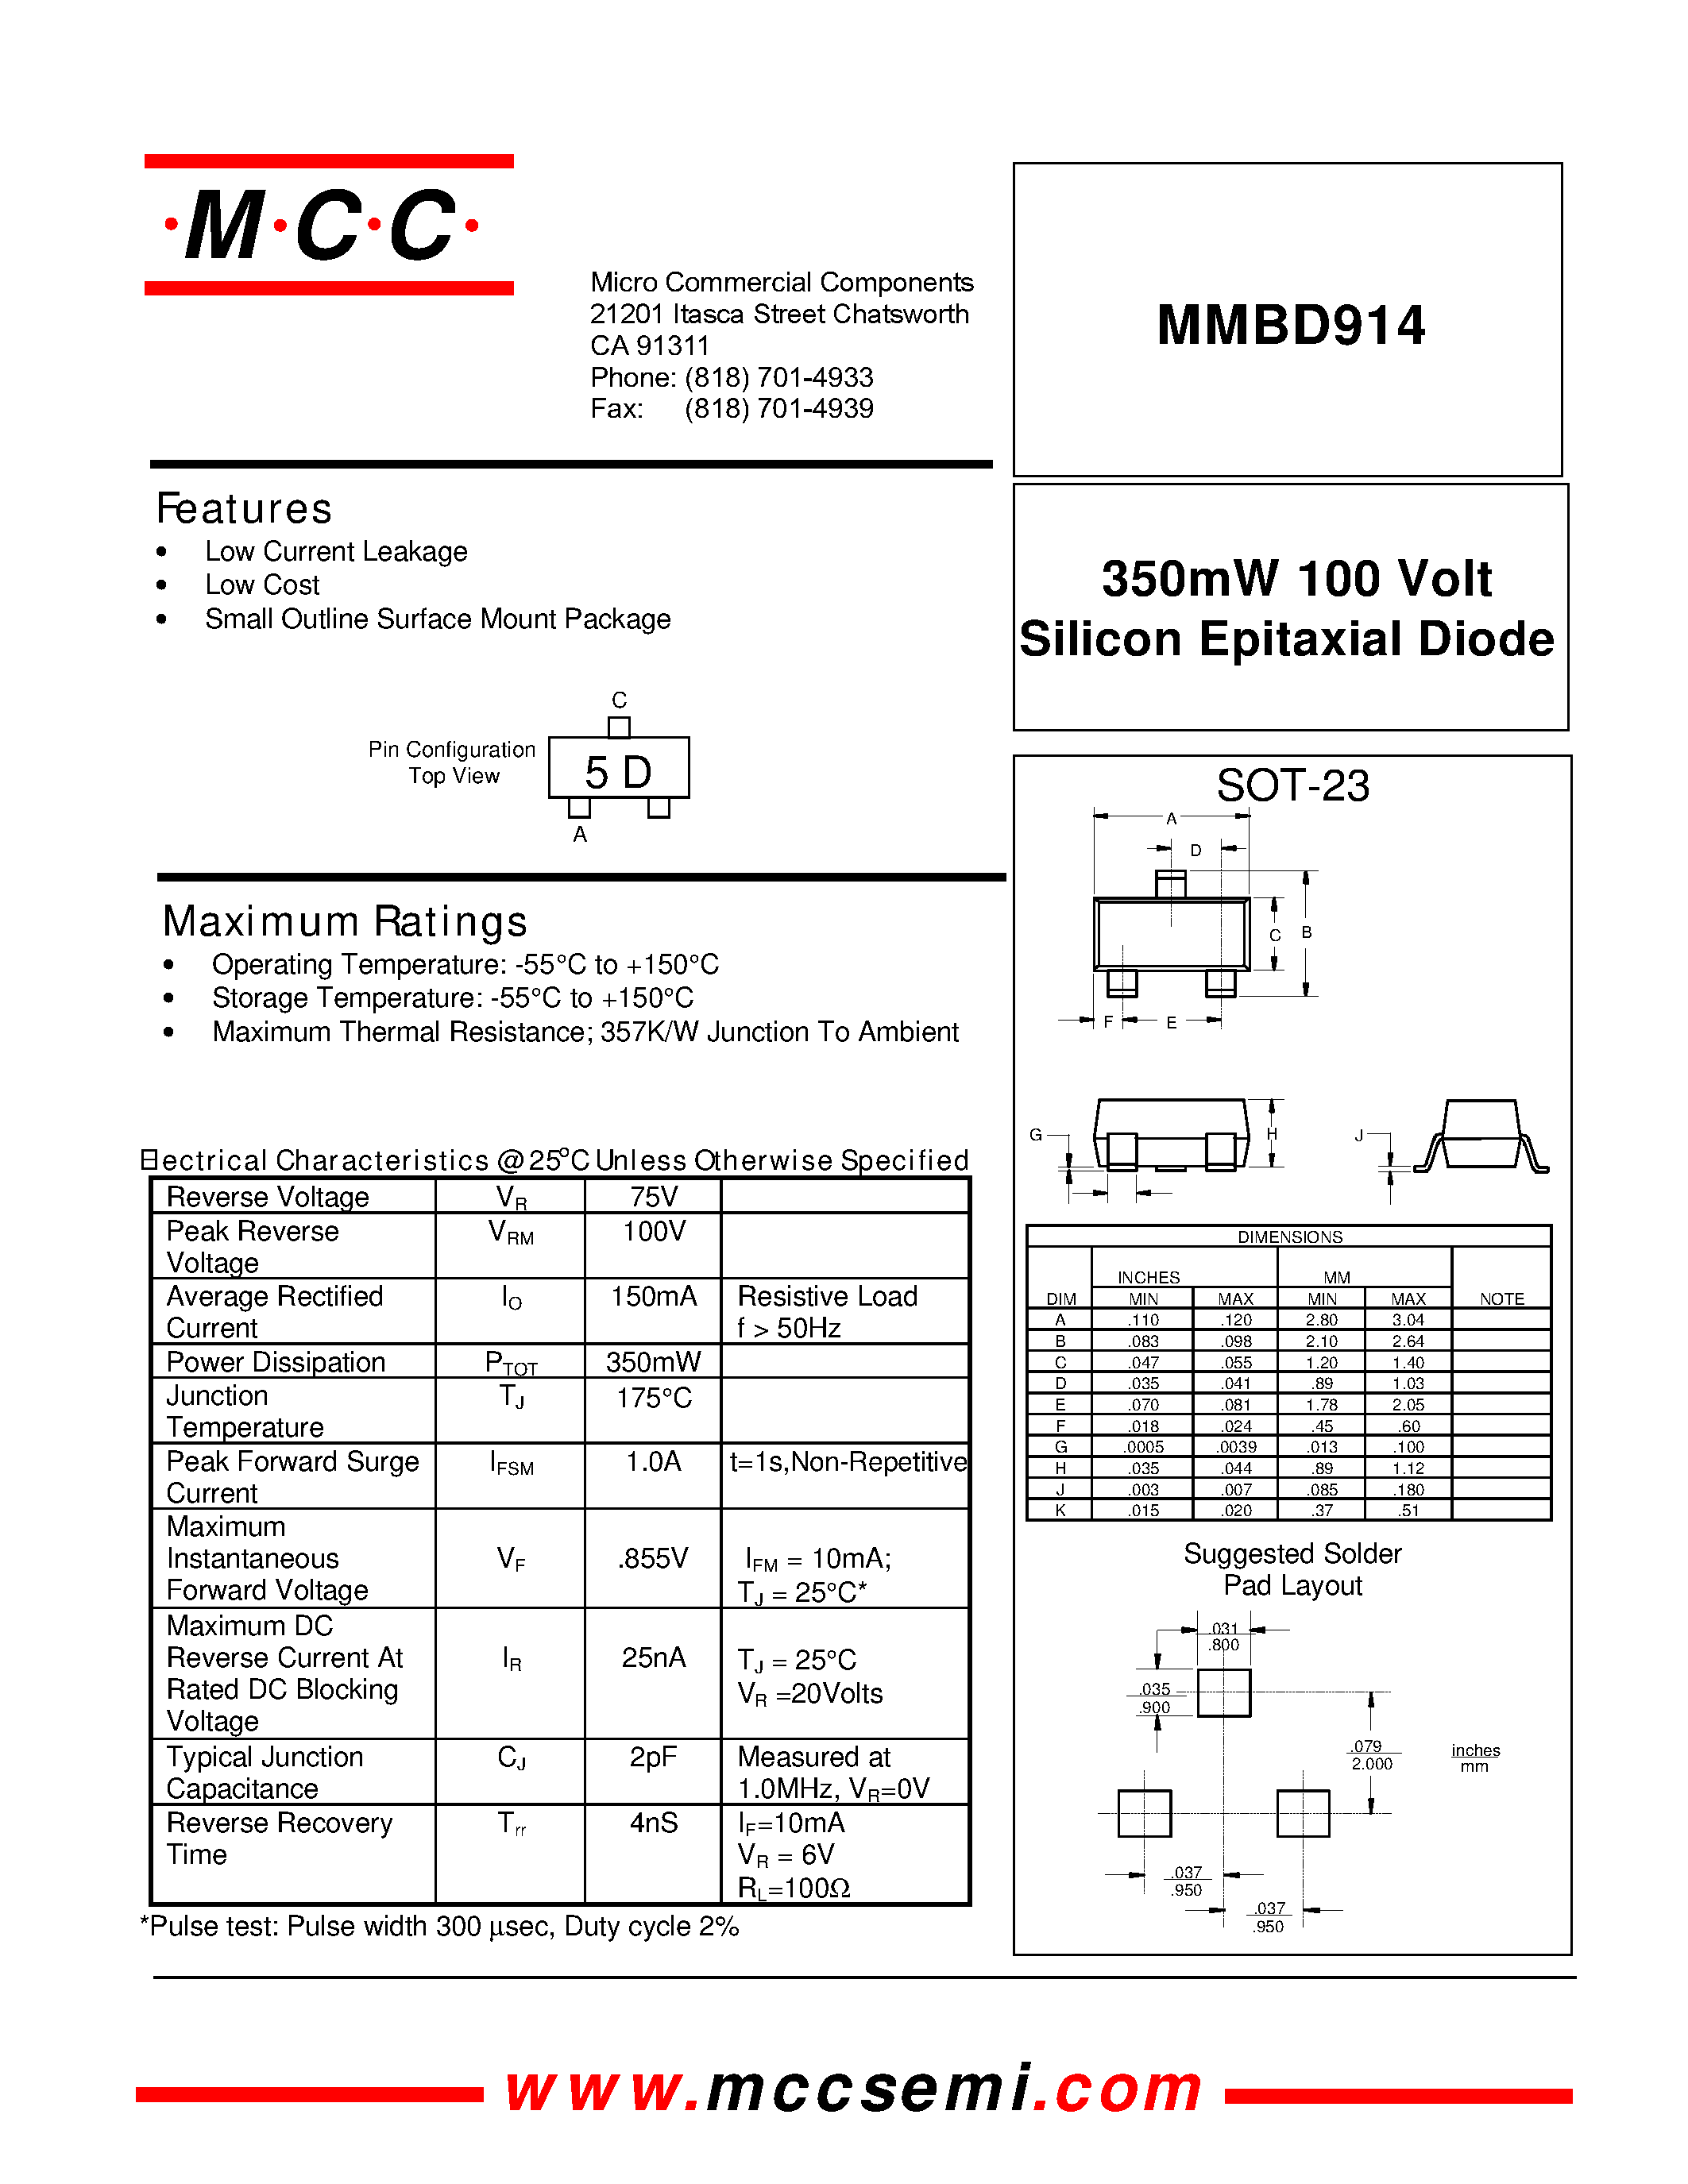 Datasheet MMBD914 - 350mW 100 Volt Silicon Epitaxial Diode page 1